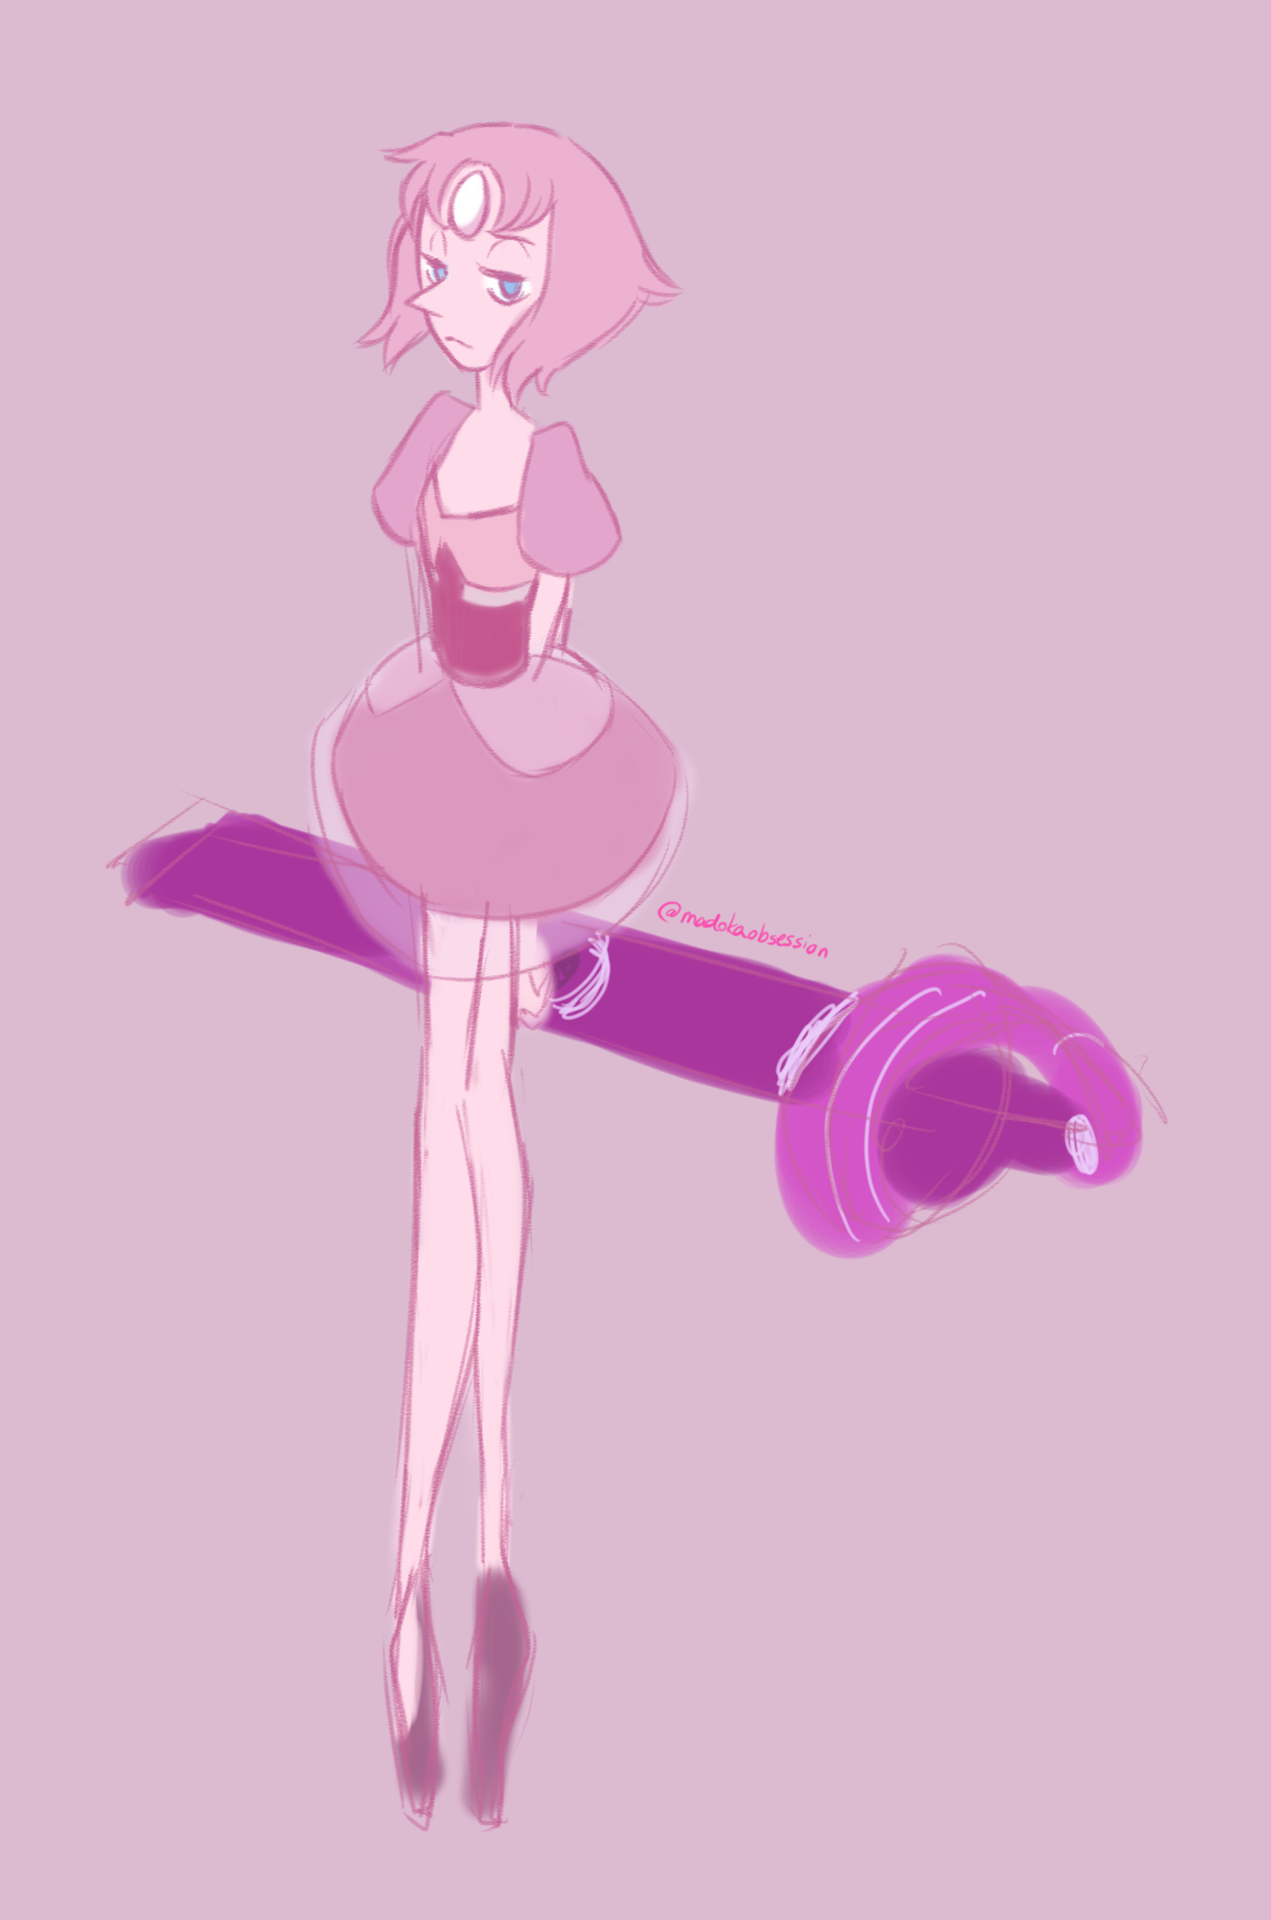 i wasn’t very happy with the fact that Pearl wasn’t as pink as Yellow Pearl was yellow, or as Blue Pearl was blue, so i felt like pink-ing everything up!